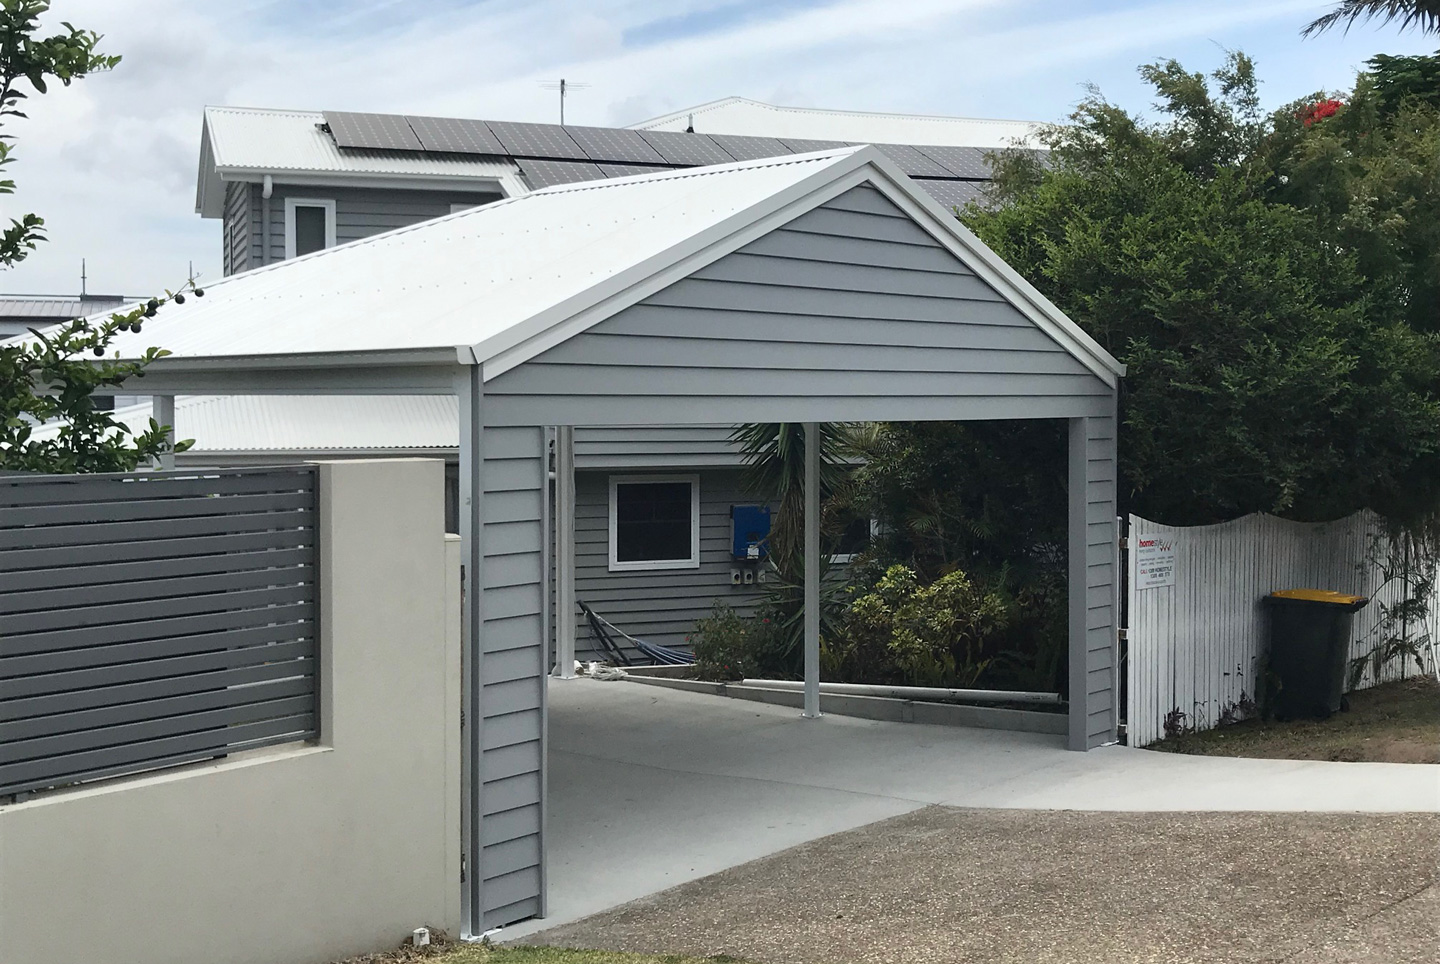 How To Plan And Design The Perfect Carport For Your Sydney Home?